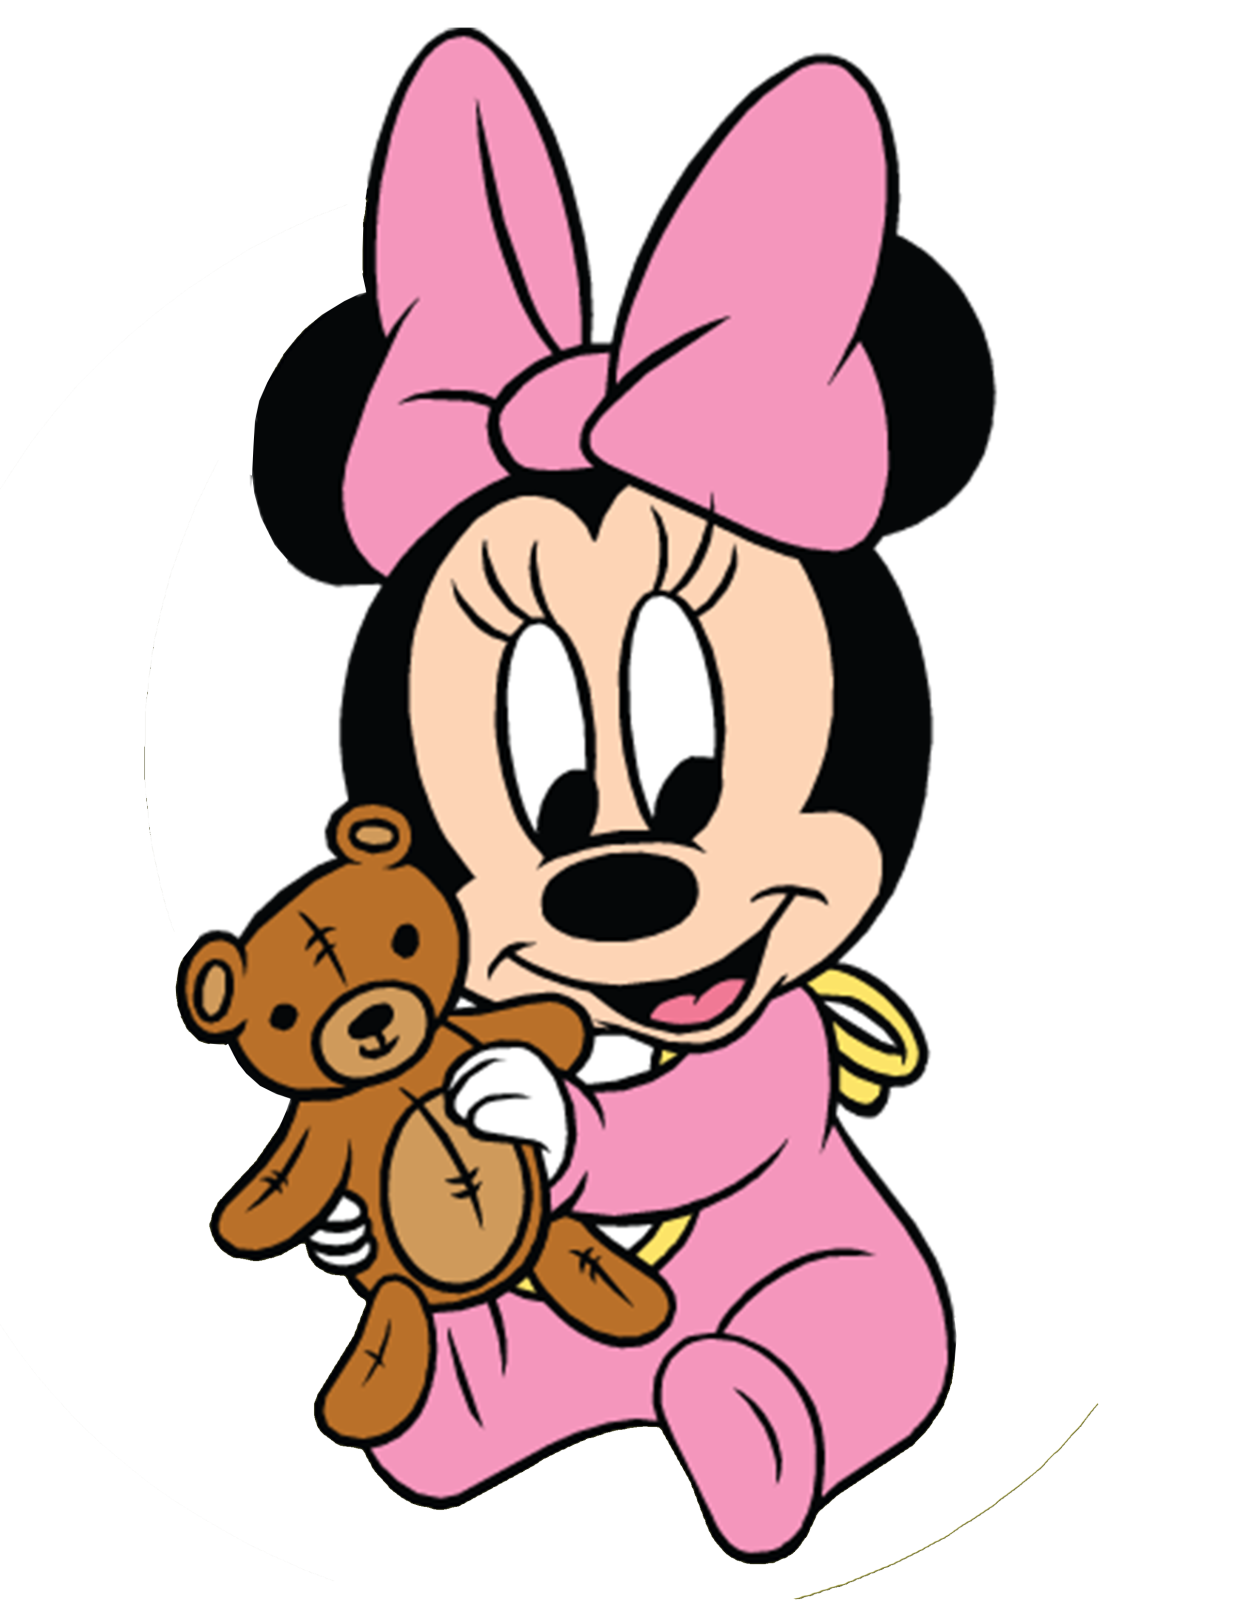 Free download Baby Minnie Image [1236x1600] for your Desktop, Mobile & Tablet. Explore Baby Minnie Mouse Wallpaper. Minnie Mouse Wallpaper for Desktop, Minnie Mouse Wallpaper HD, Minnie Mouse Wallpaper